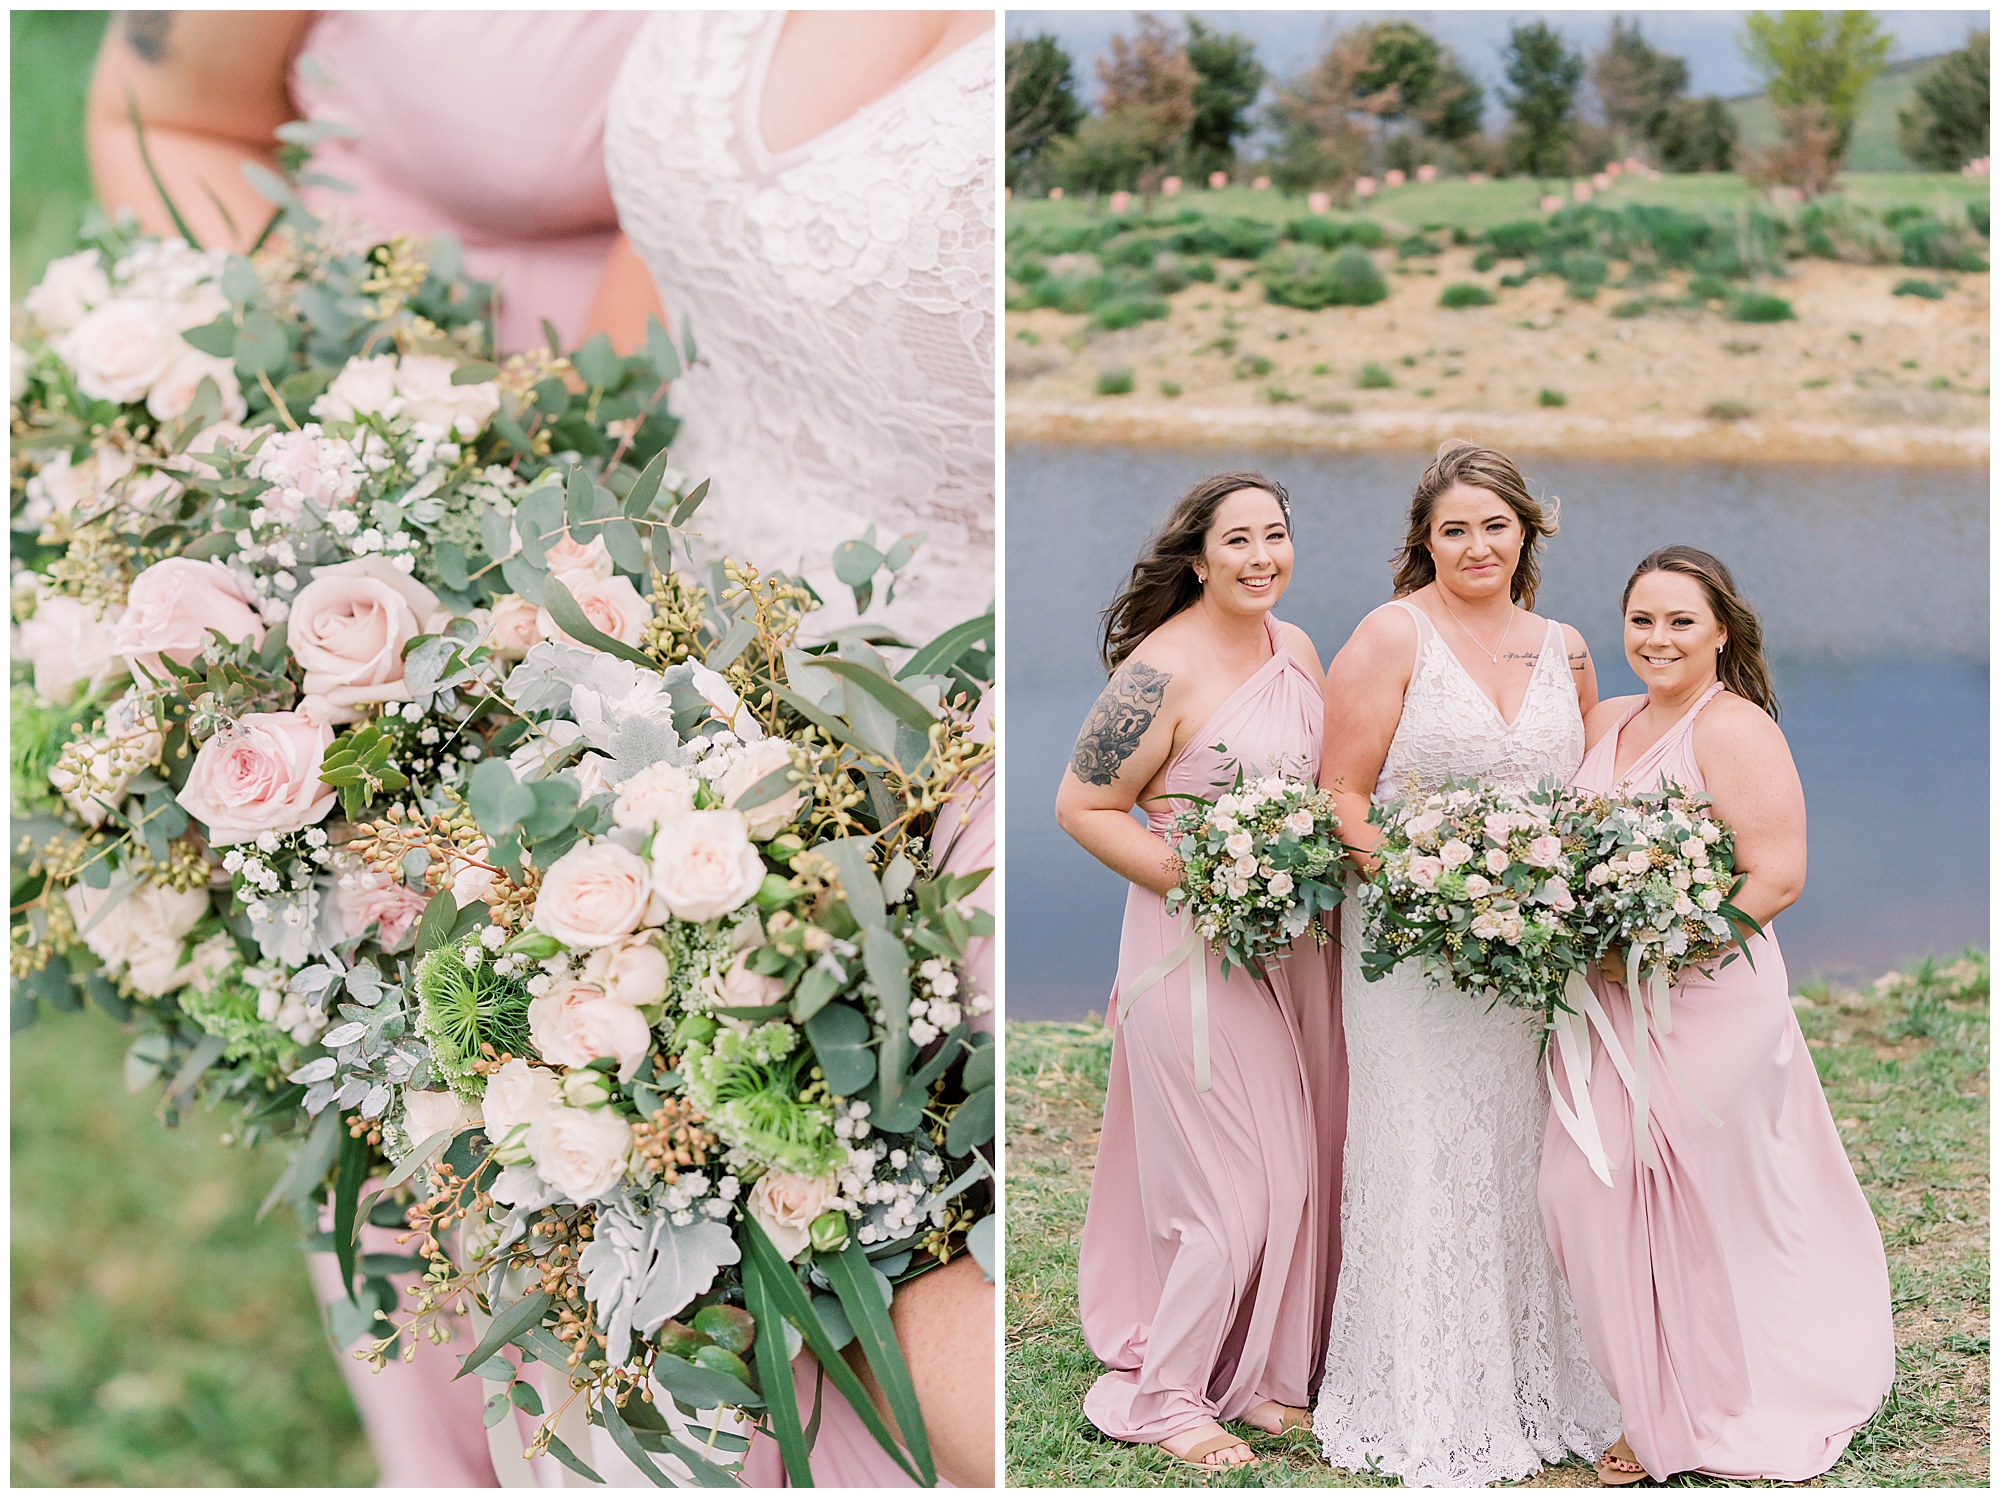 Stunning bridesmaids dresses in Blush pink with green flowers